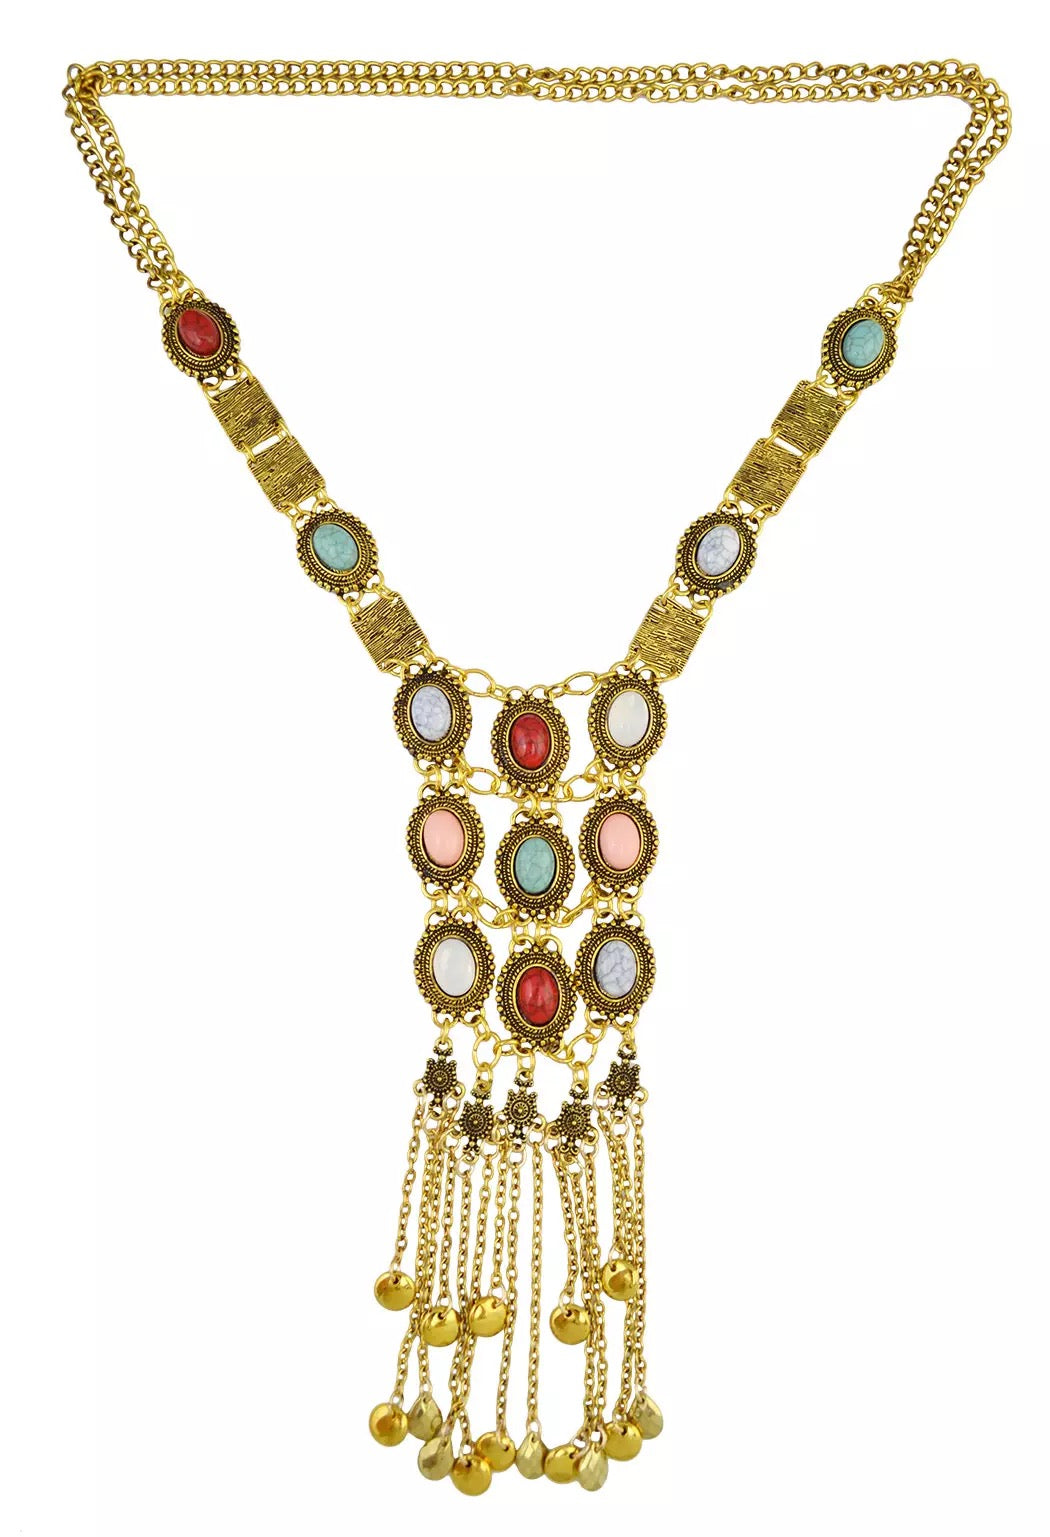 Long Multicoloured Resins Bohemian Style Tribal Statement Necklace